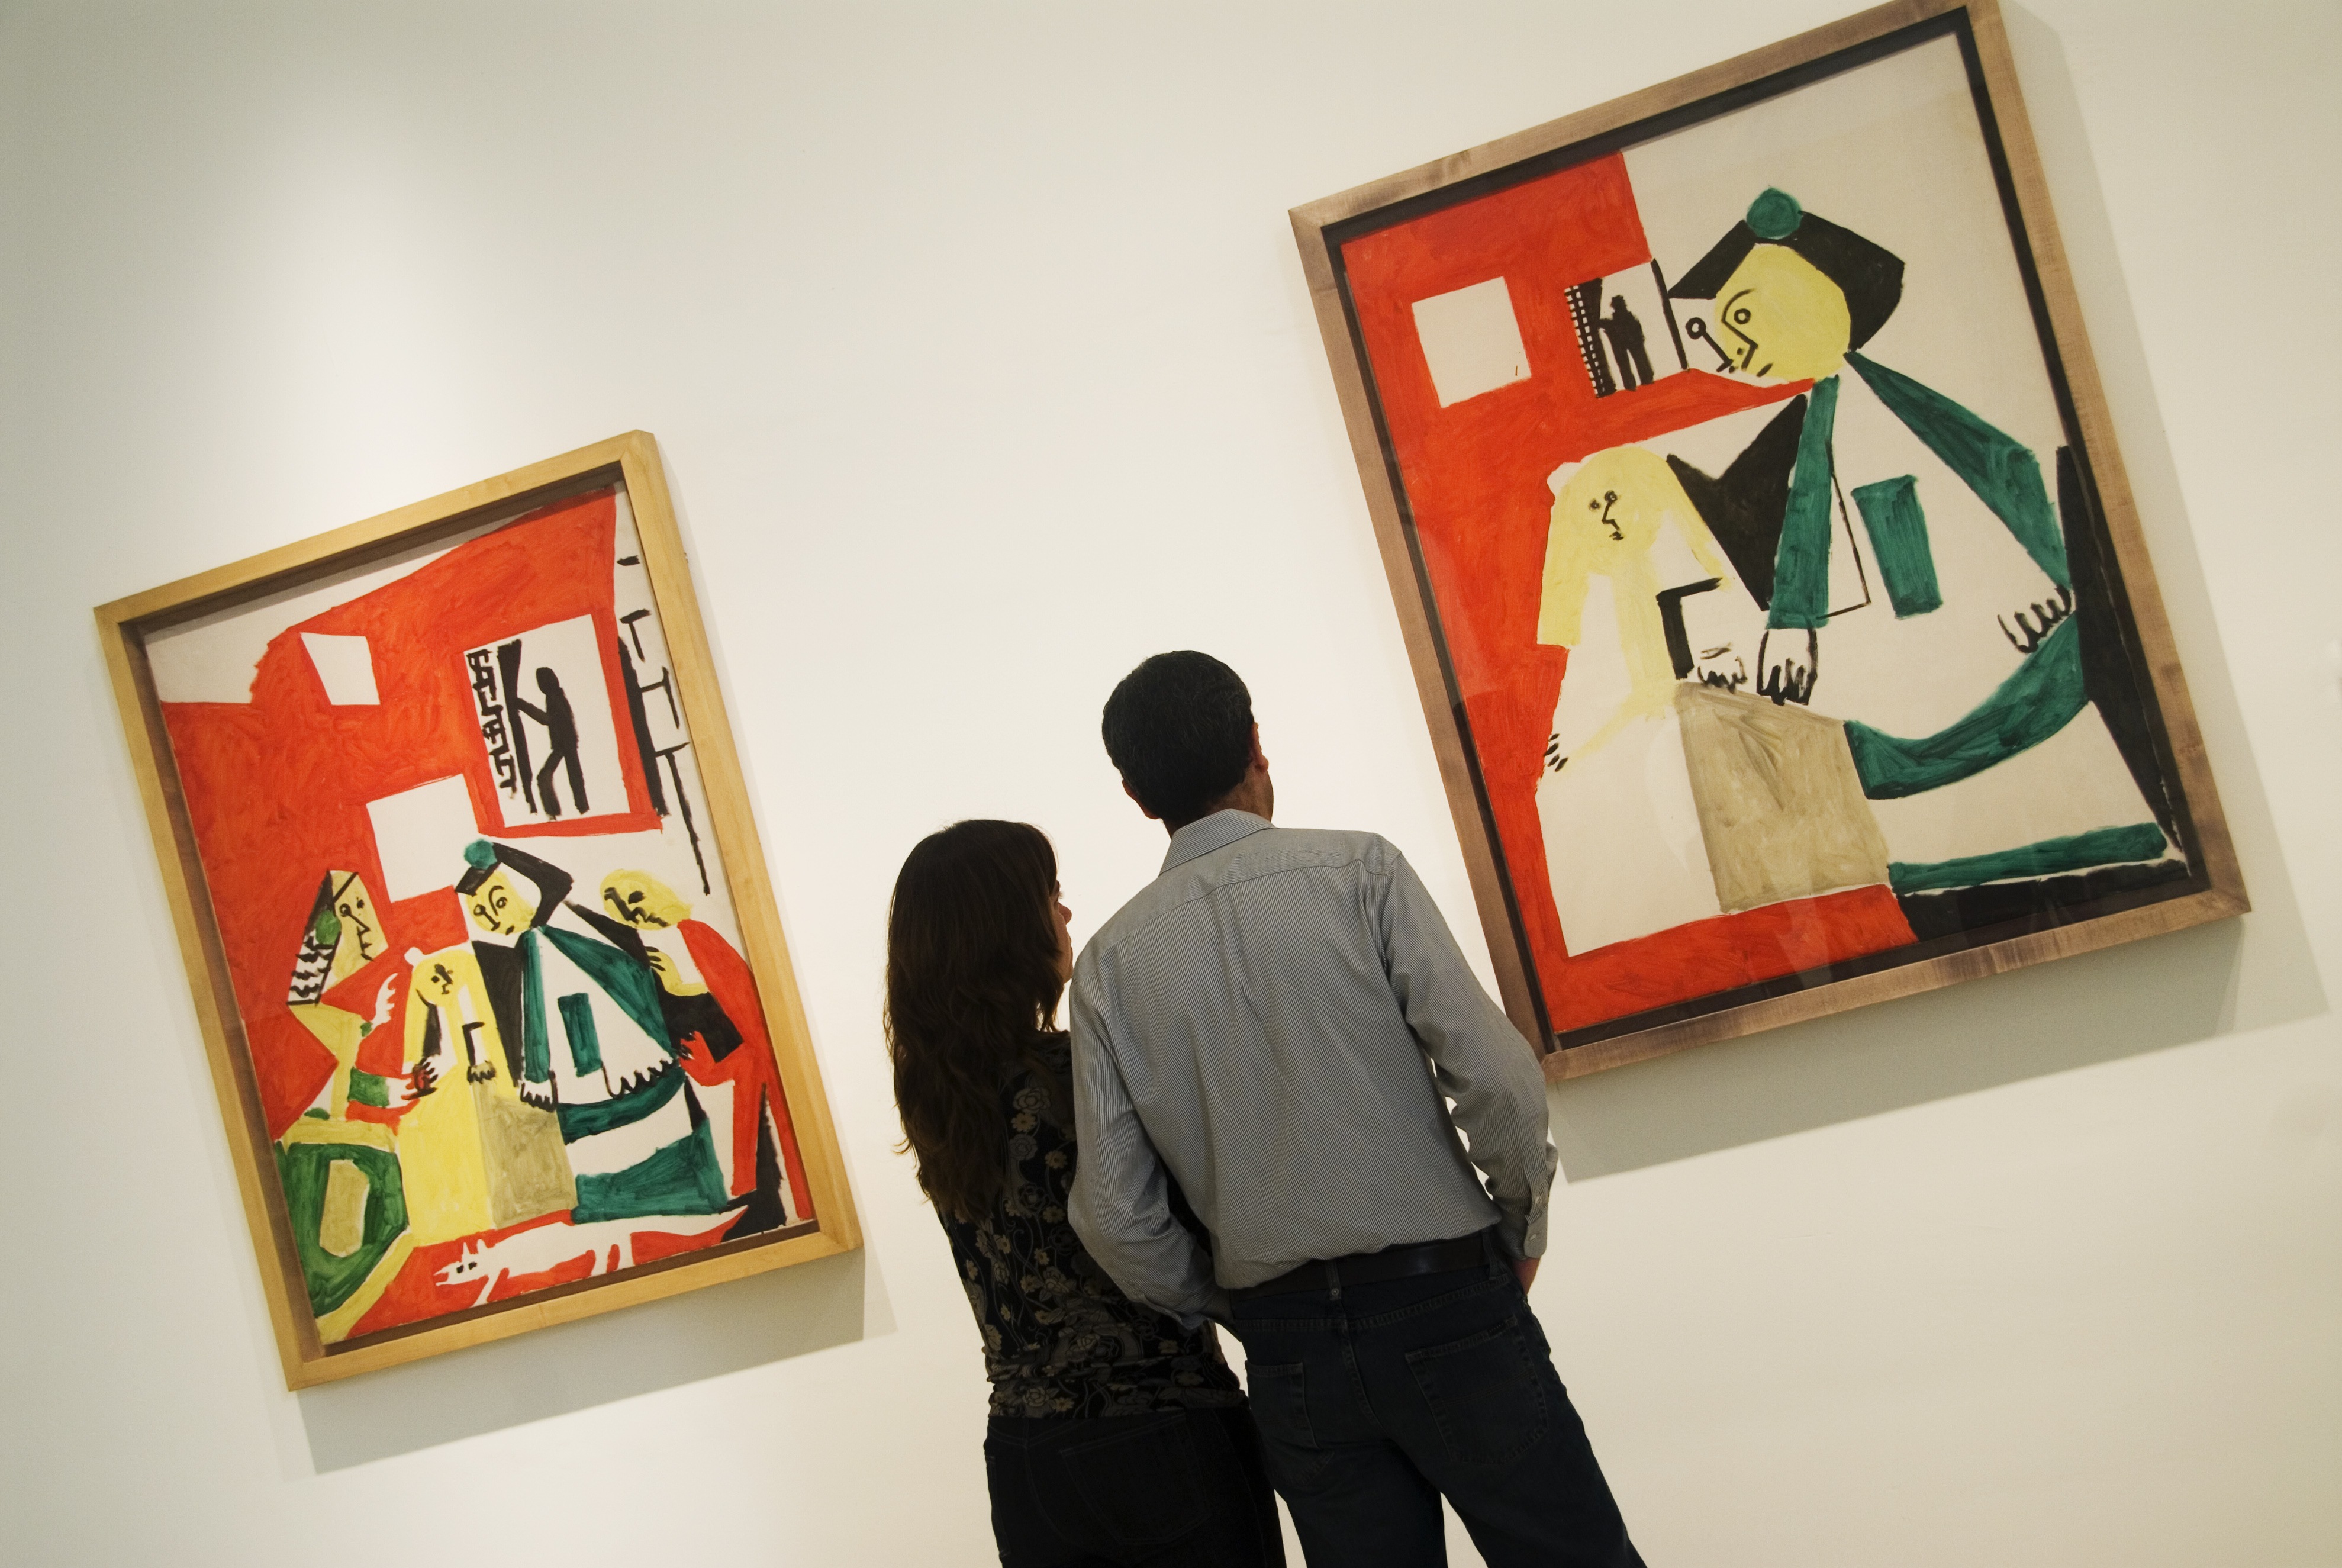 Museu Picasso | Barcelona, Spain Attractions - Lonely Planet3957 x 2649